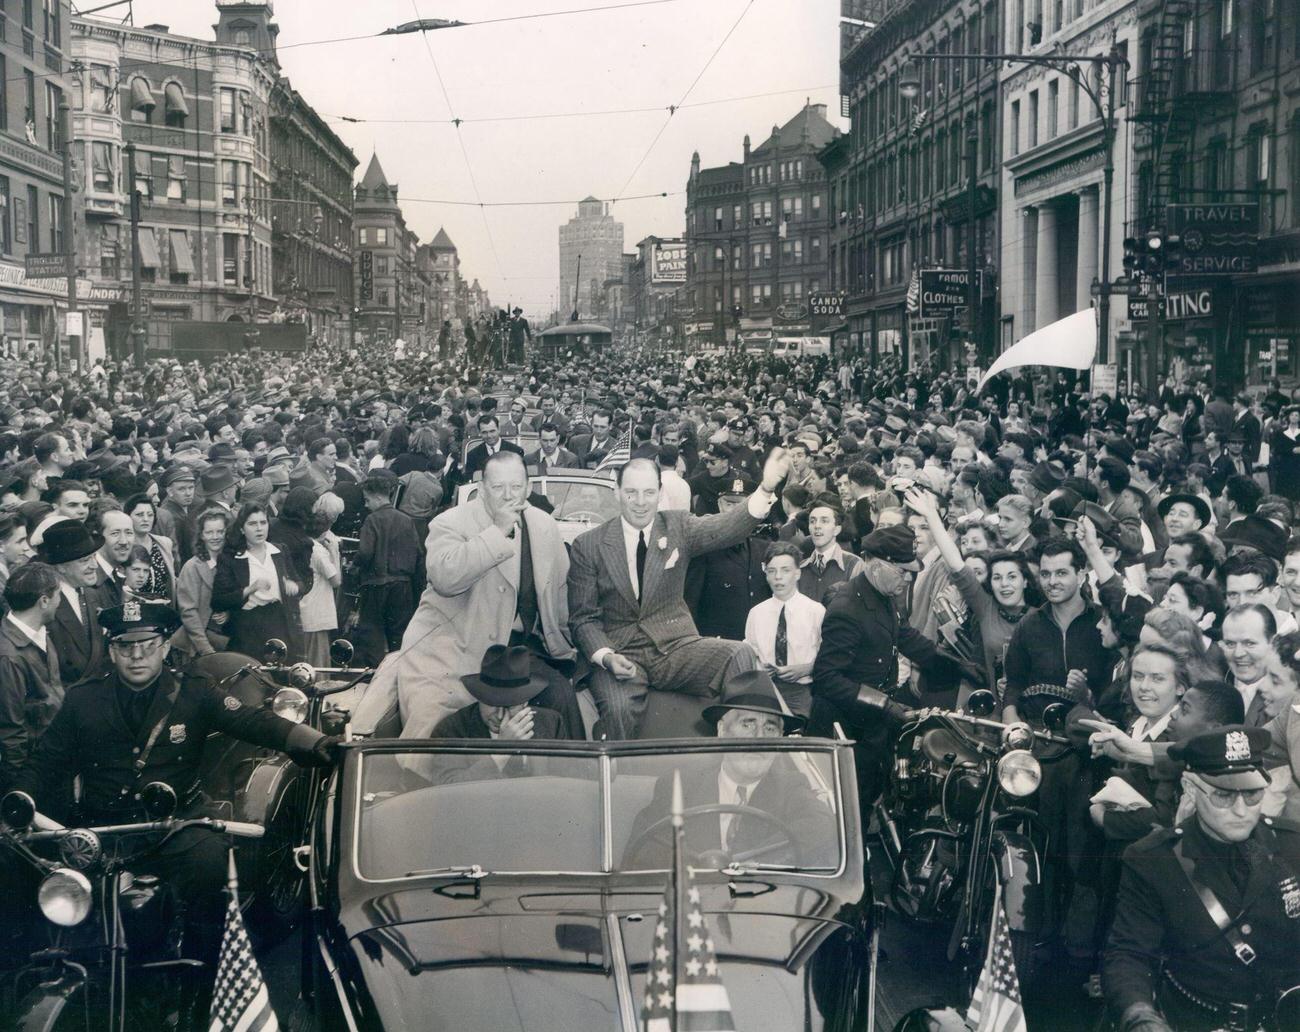 Brooklyn Dodgers President Larry Mcphail And Manager Leo Durocher Photographed During The Dodger Victory Parade On Flatbush Avenue On September 19, 1941.